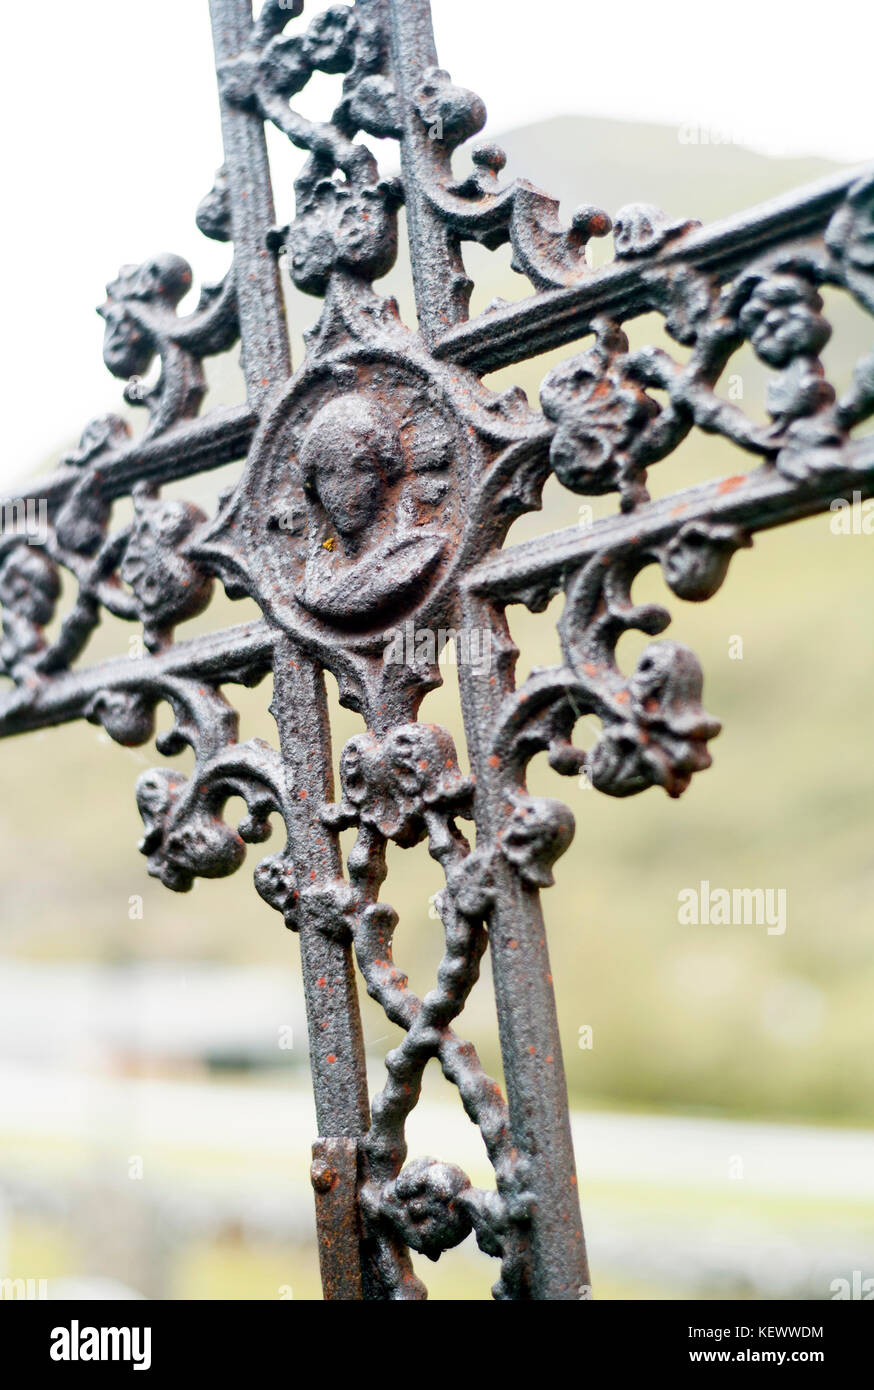 The placement of the Holy Cross on a gravesite as an expression of Faith in something, a Higher Power than one self, and the life after death. Stock Photo